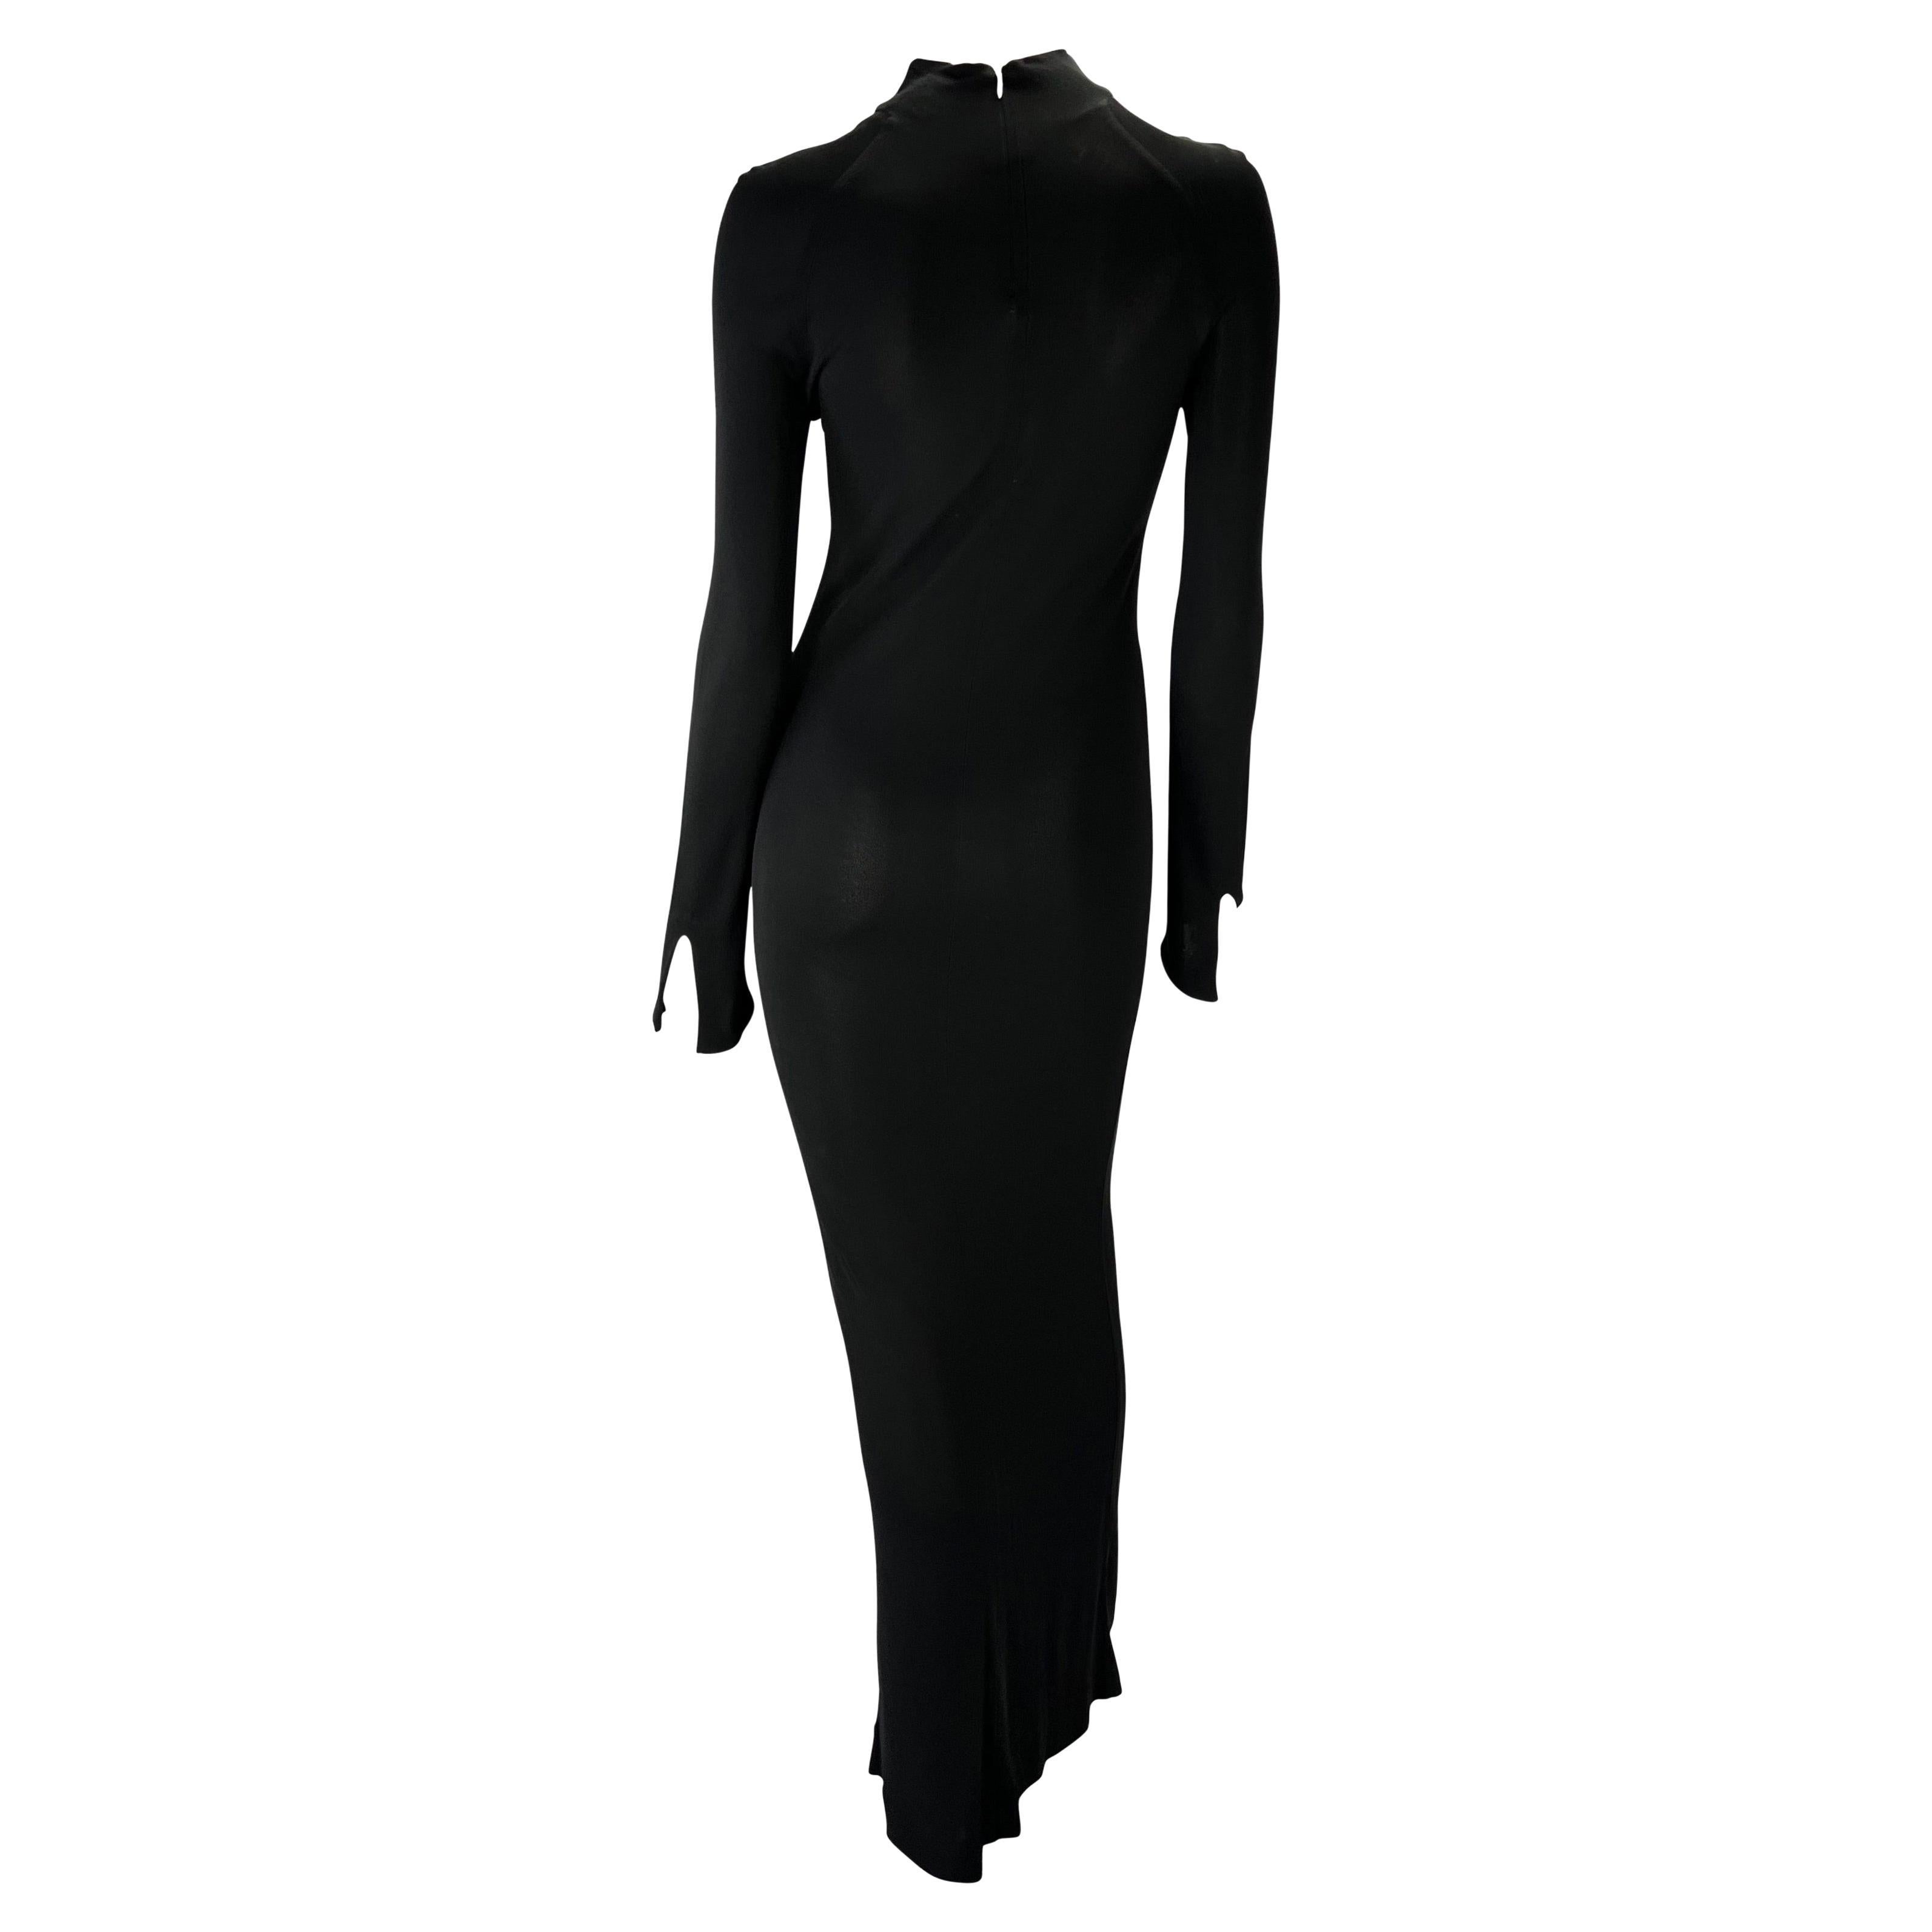 S/S 1998 Gucci by Tom Ford Black Stretch Viscose Long Sleeve Gown For Sale 6